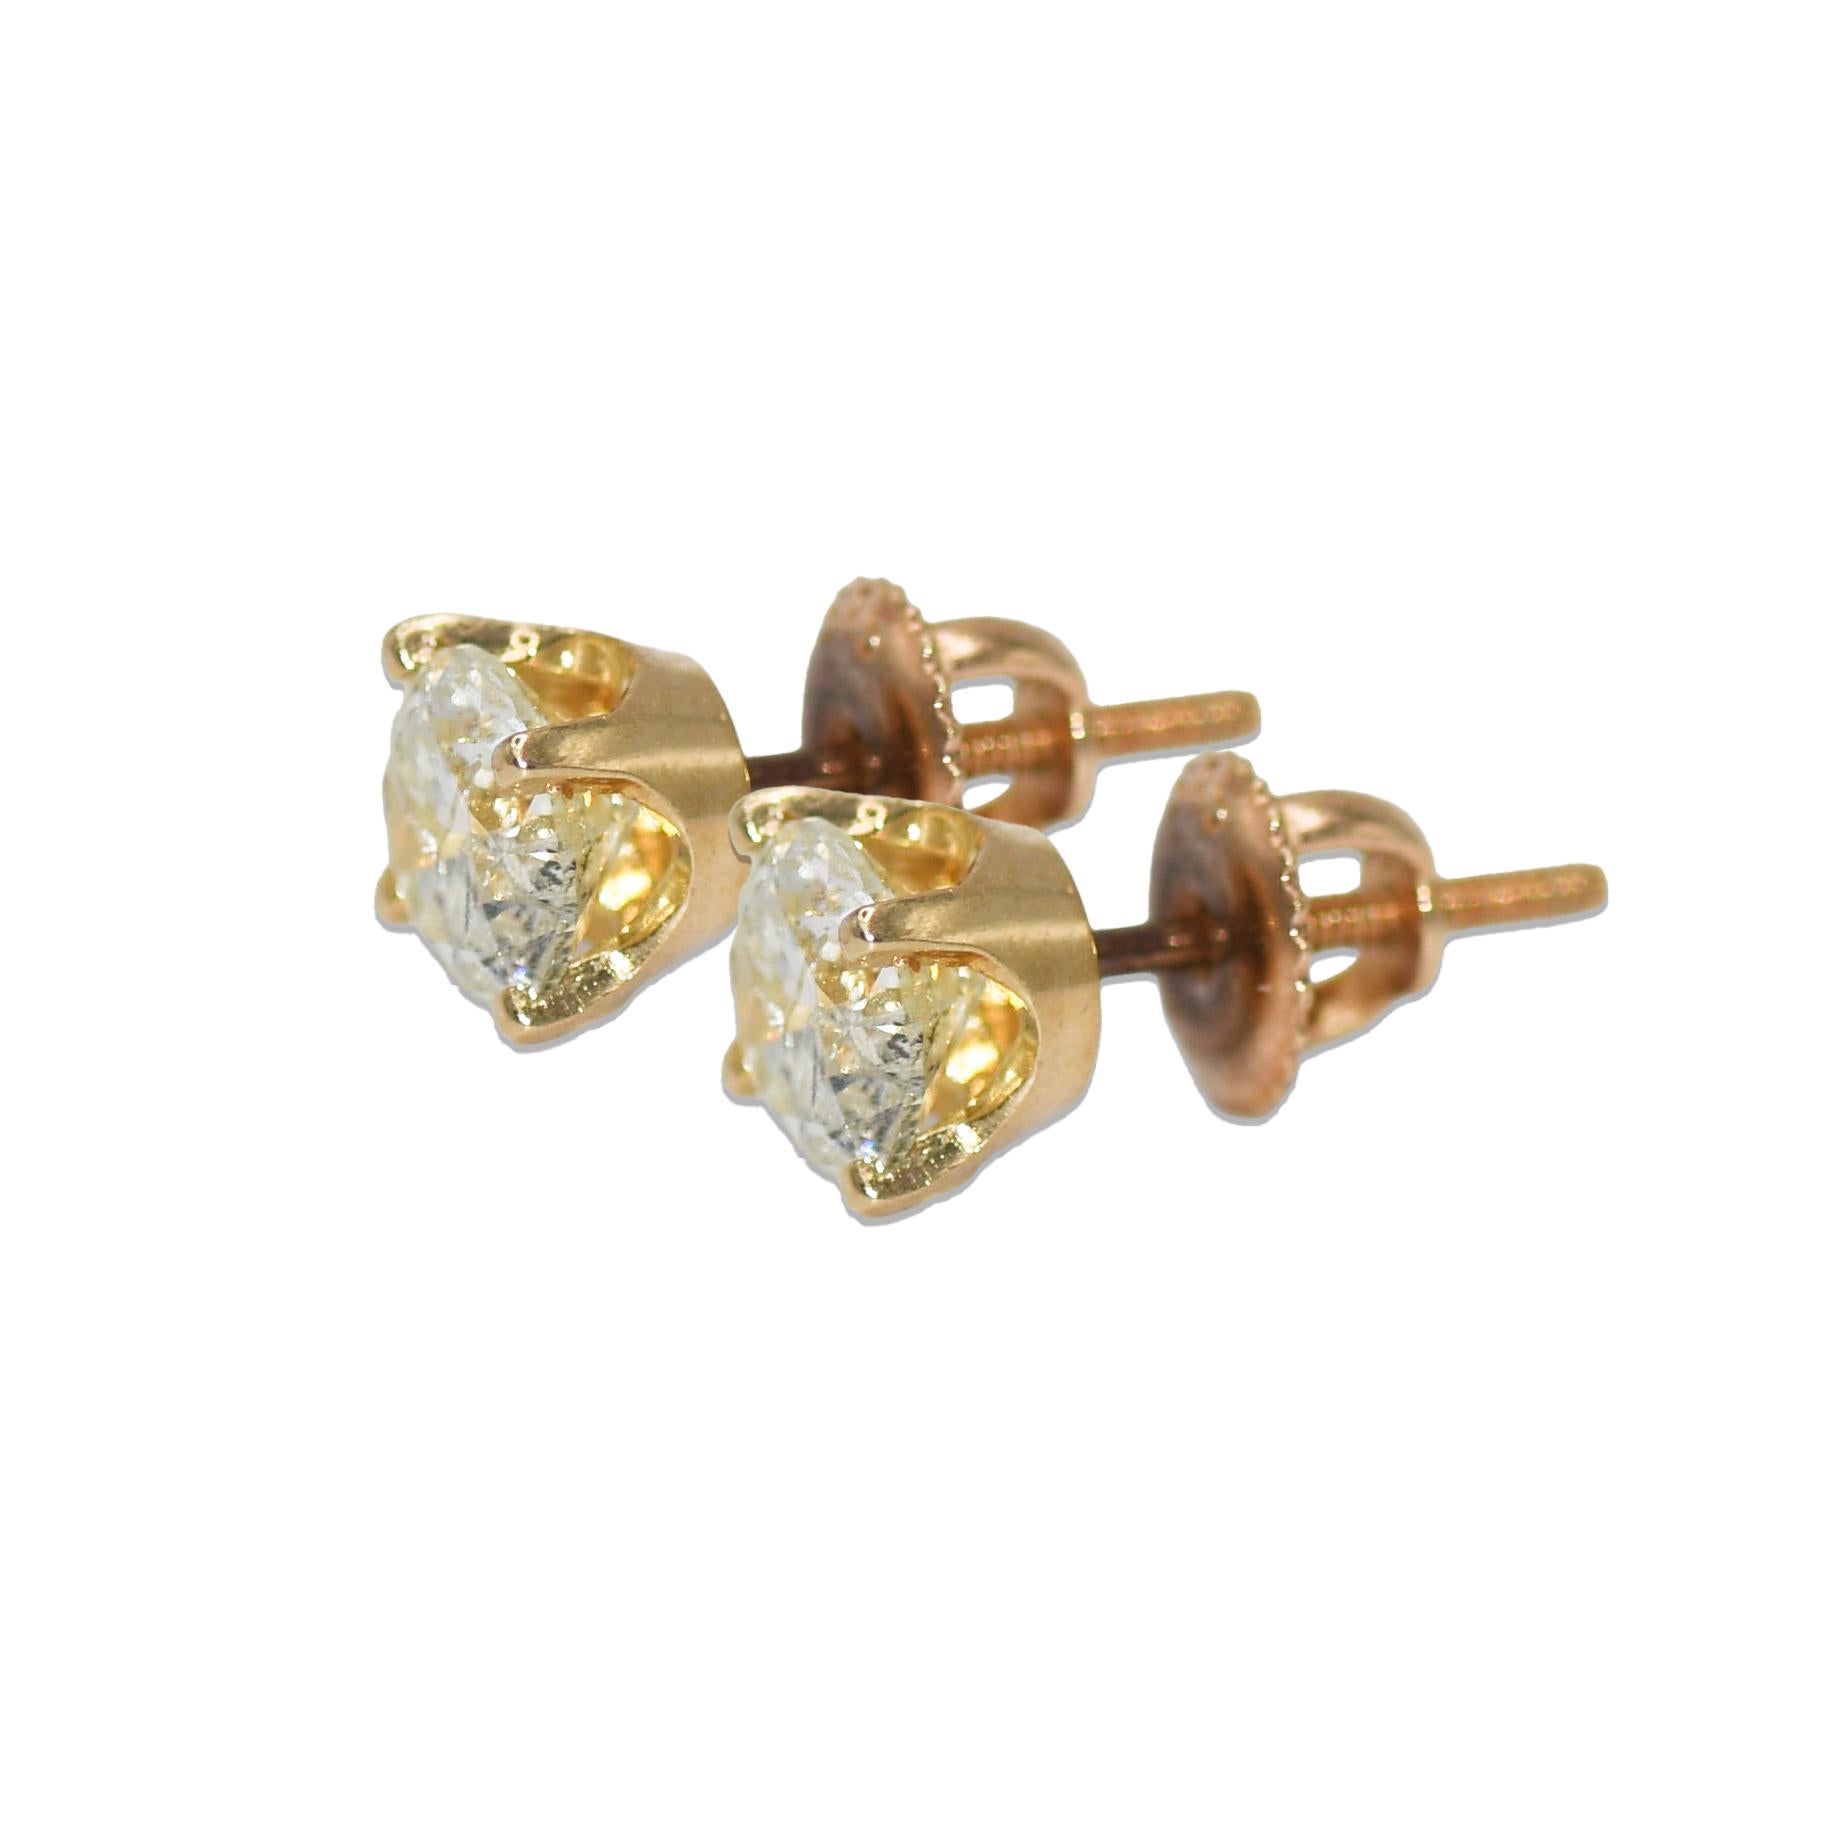 14k Yellow Gold Diamond Studs.
Stamped 585
Round Brilliant cuts, 1.50 total carats, K-L-M Color, I1-I2 Clarity.
weighs 1.6 grams gross weight.
Screw backs for pierced ears.
Both stones face up very nice.

